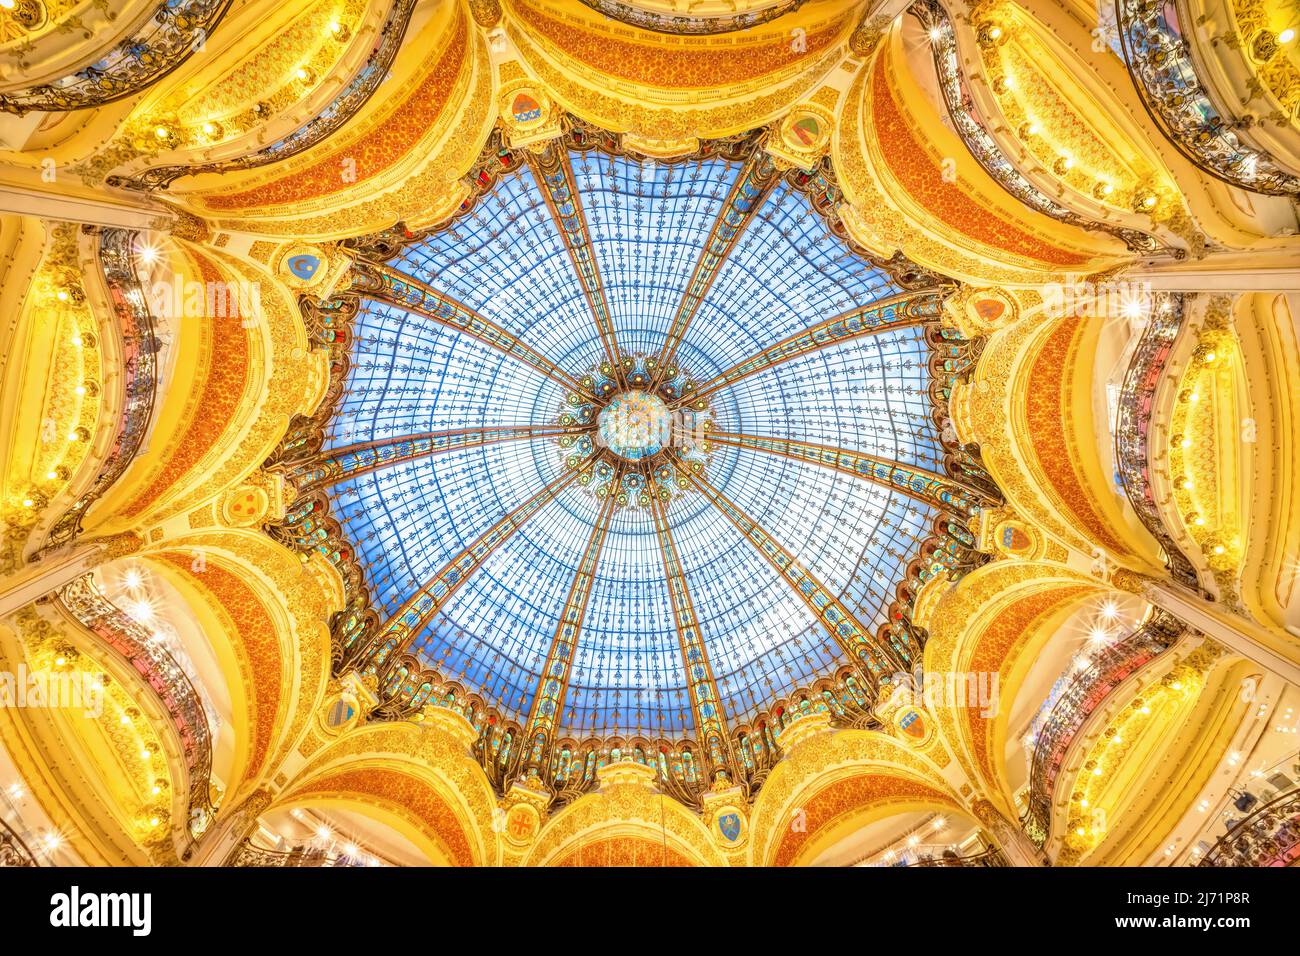 Ornate skylight of the Galeries Lafayette department store in Paris France Stock Photo